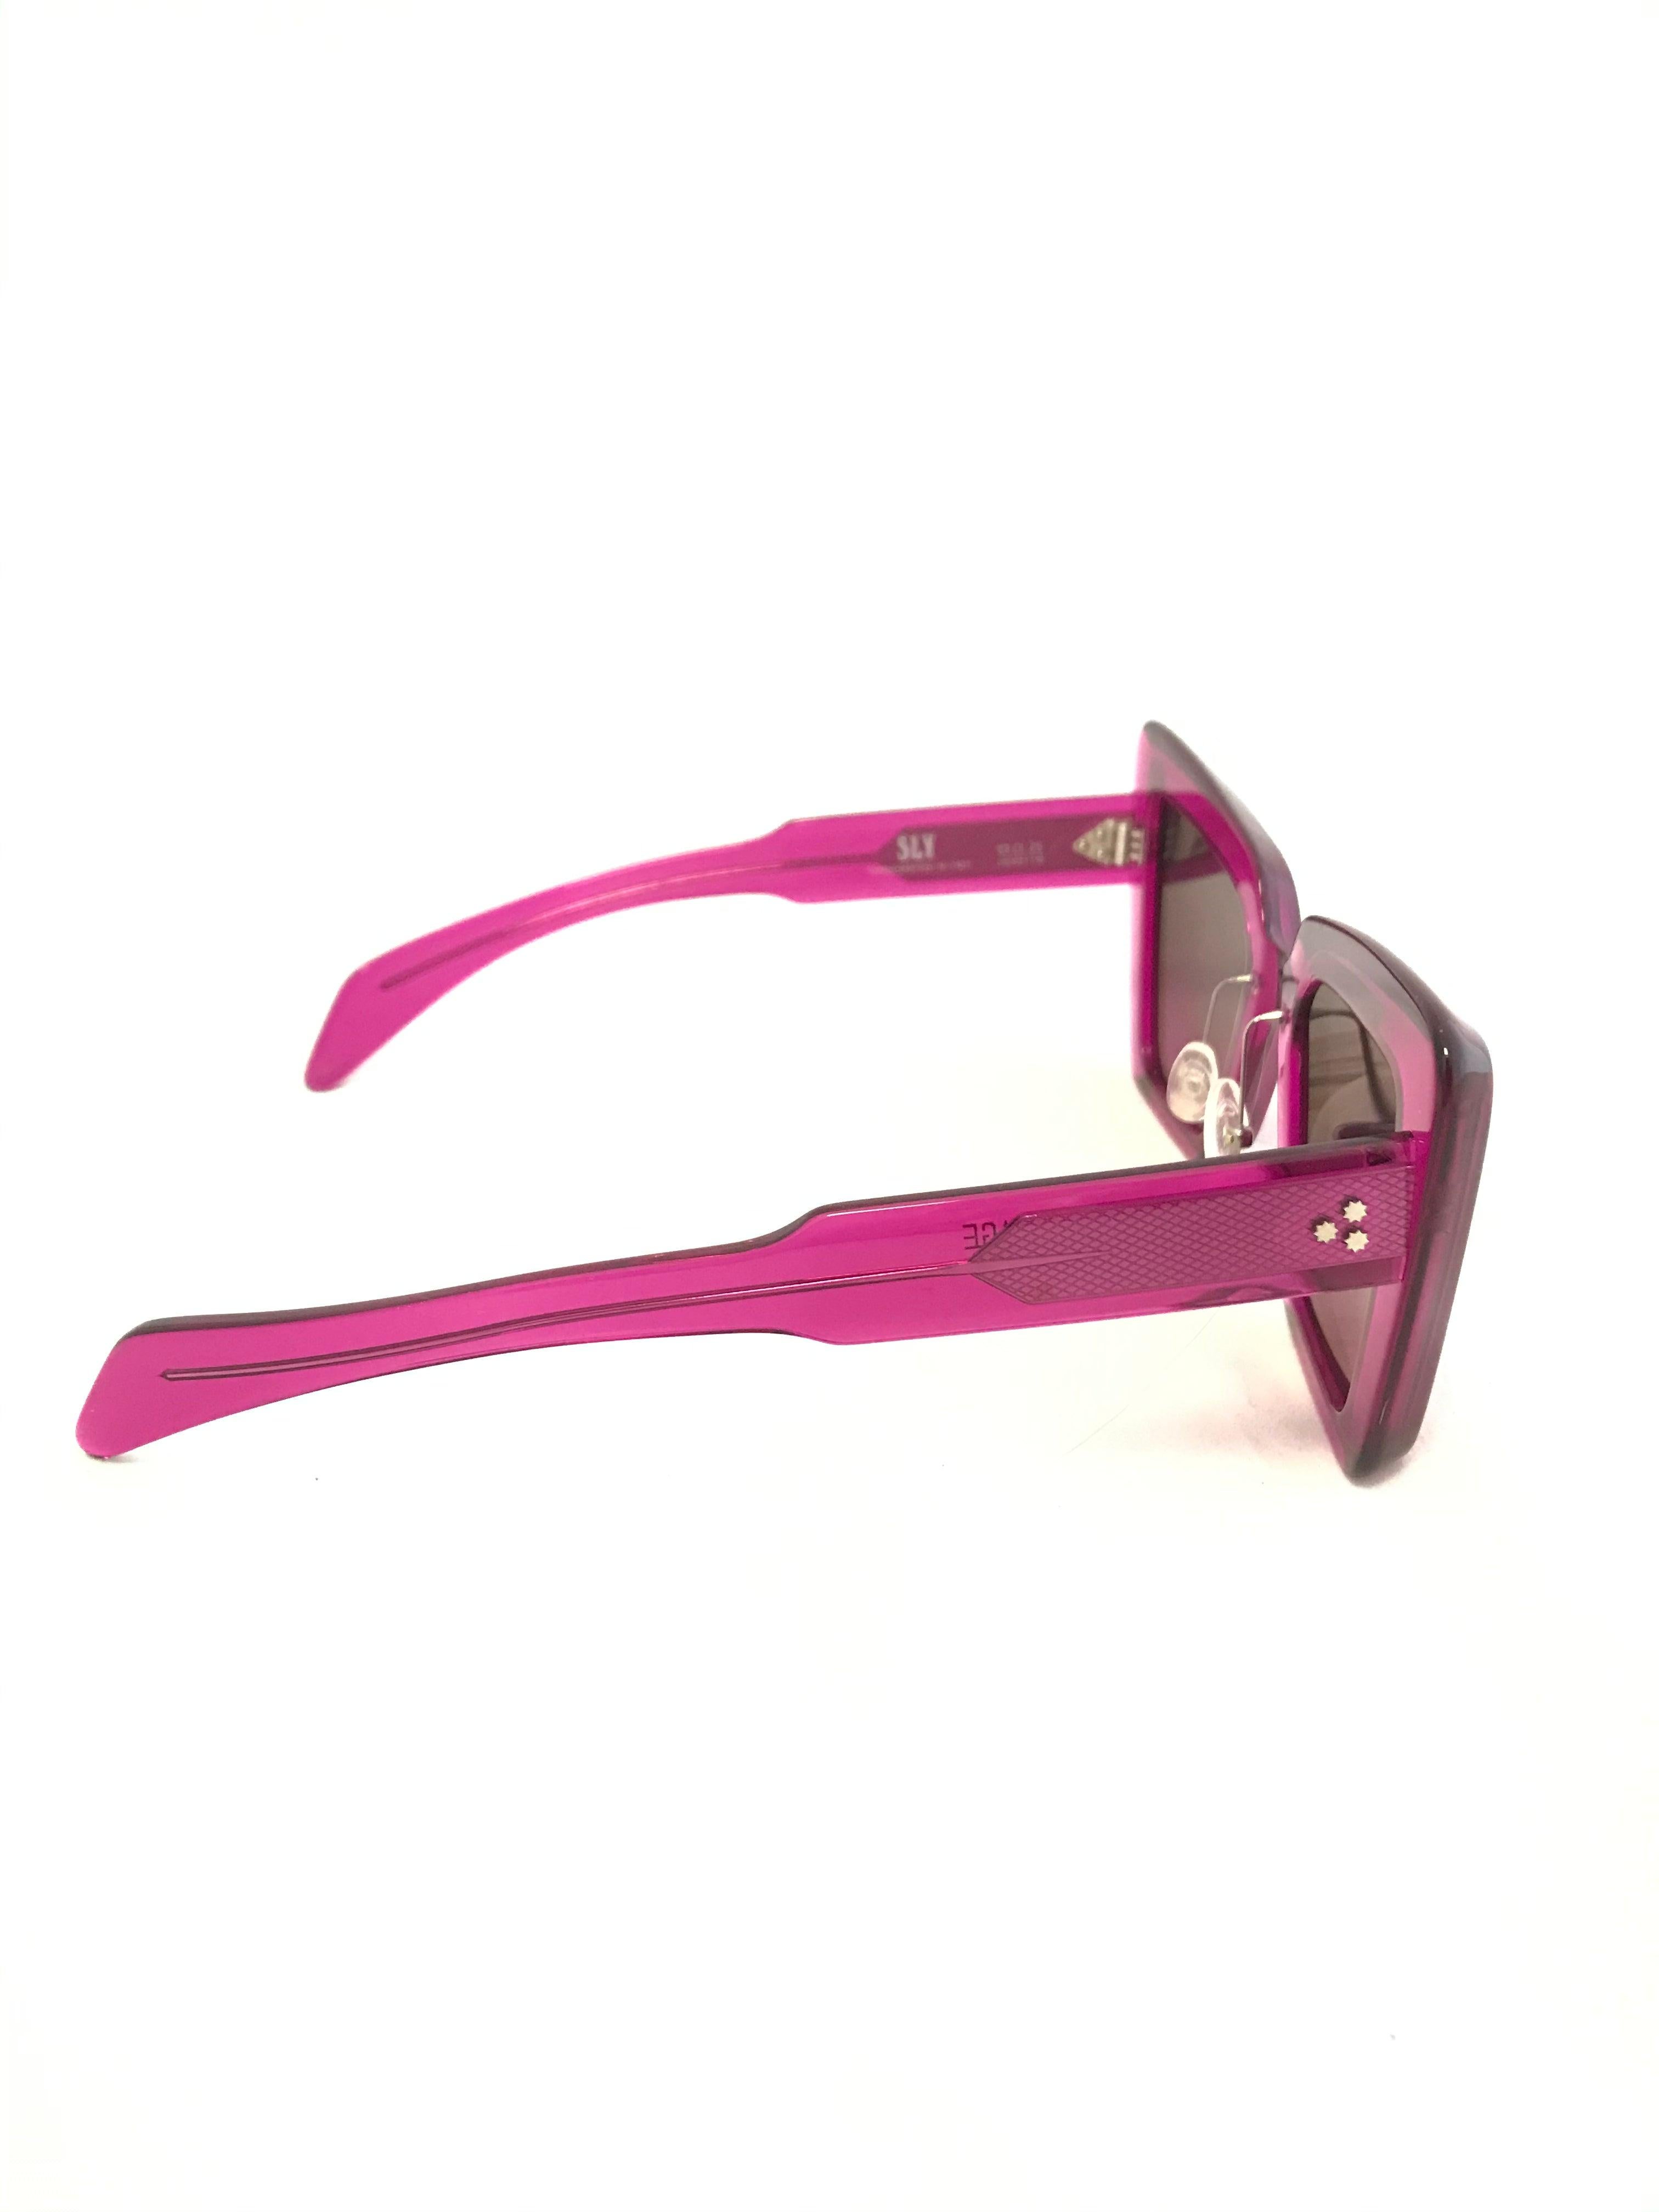 Jacques Marie Mage Limited Edition Hot Pink  'Sly' Sunglasses For Sale 2